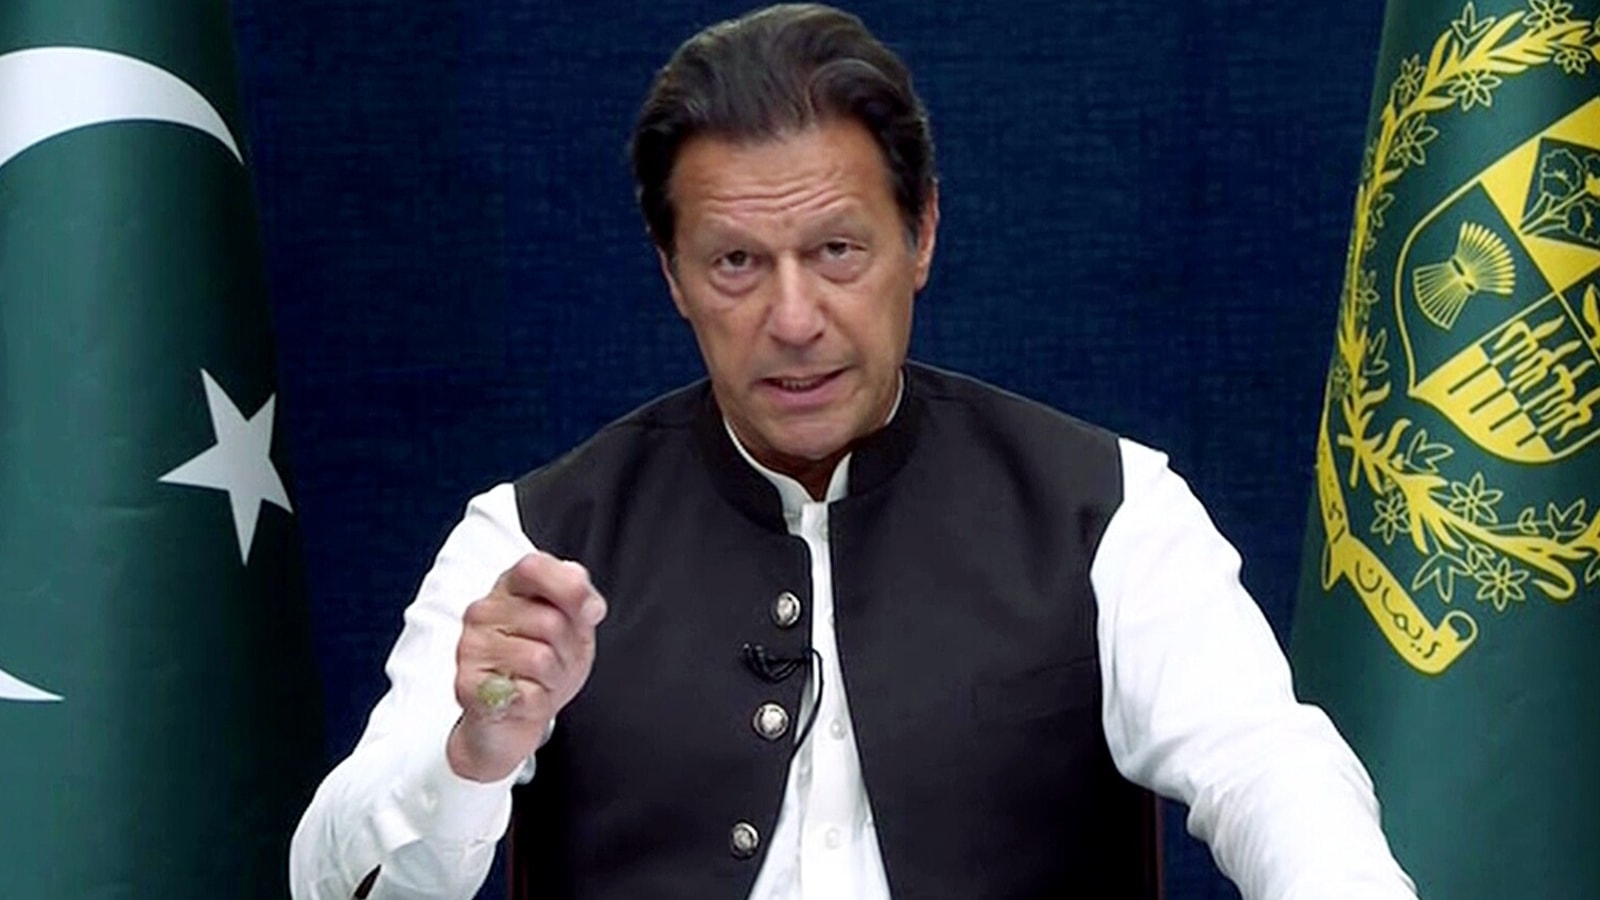 On foreign power against him, Imran Khan names US in TV address ...